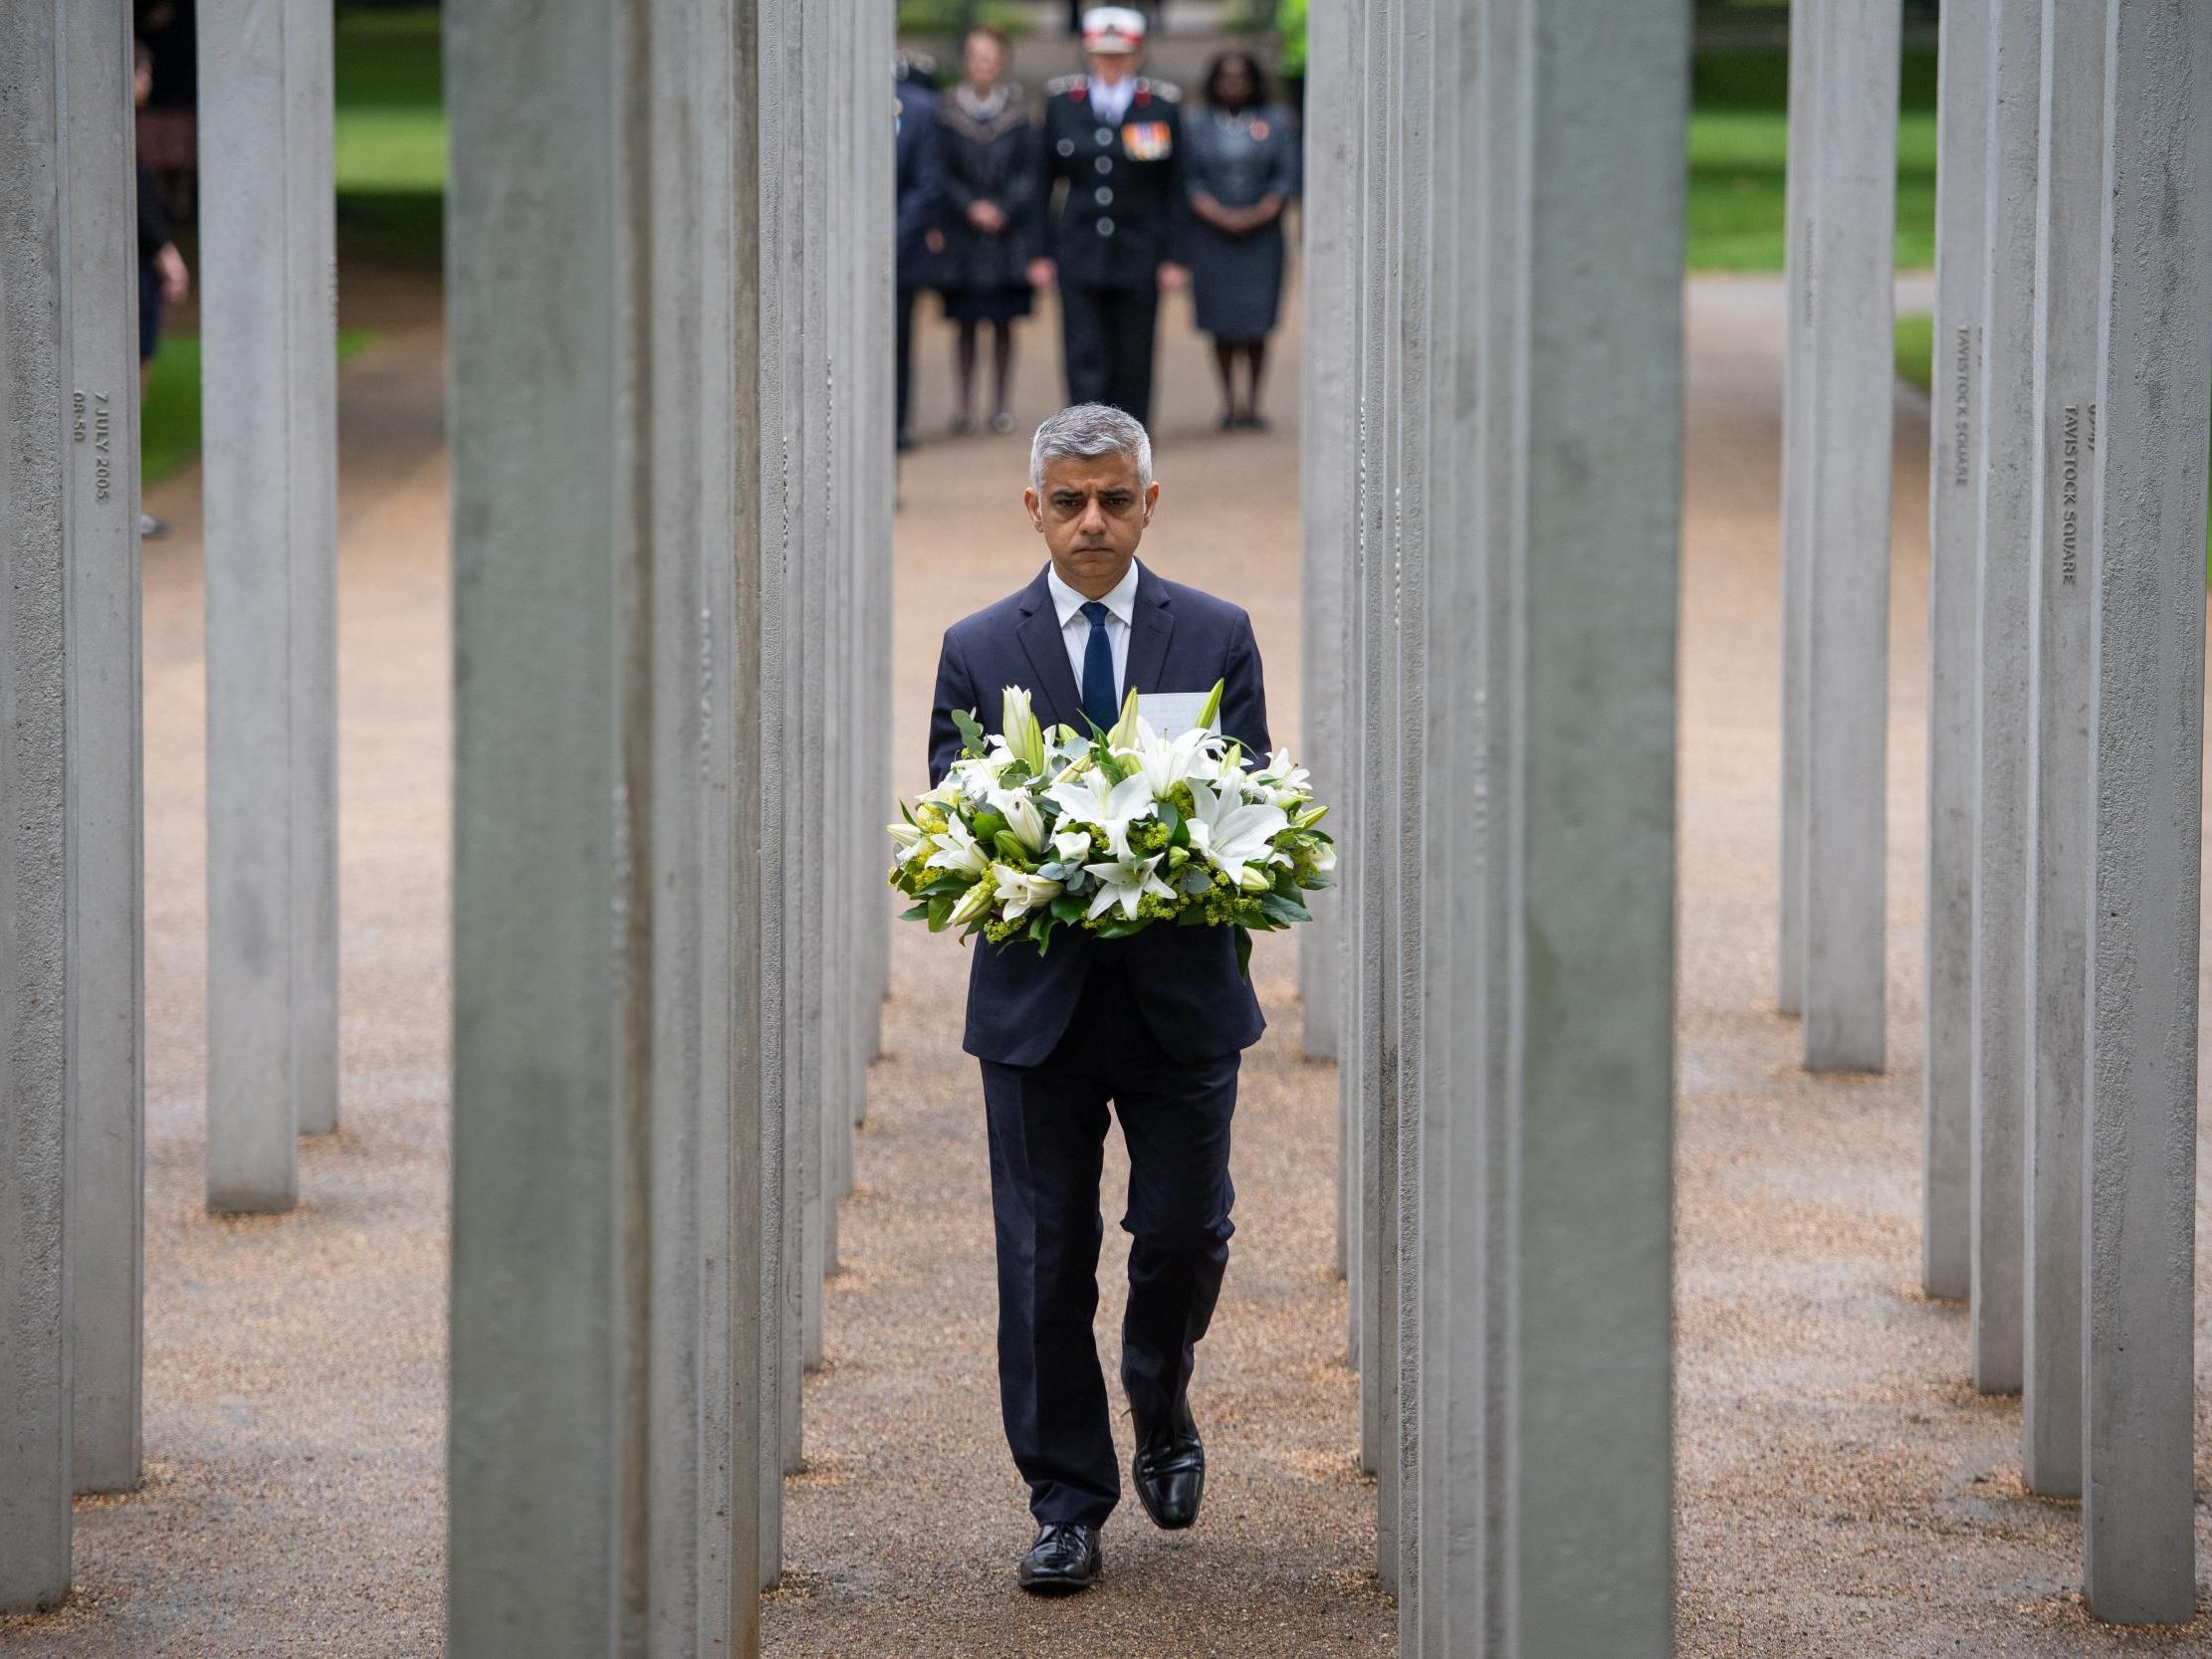 The Muslim mayor laid a wreath at a memorial event in the capital